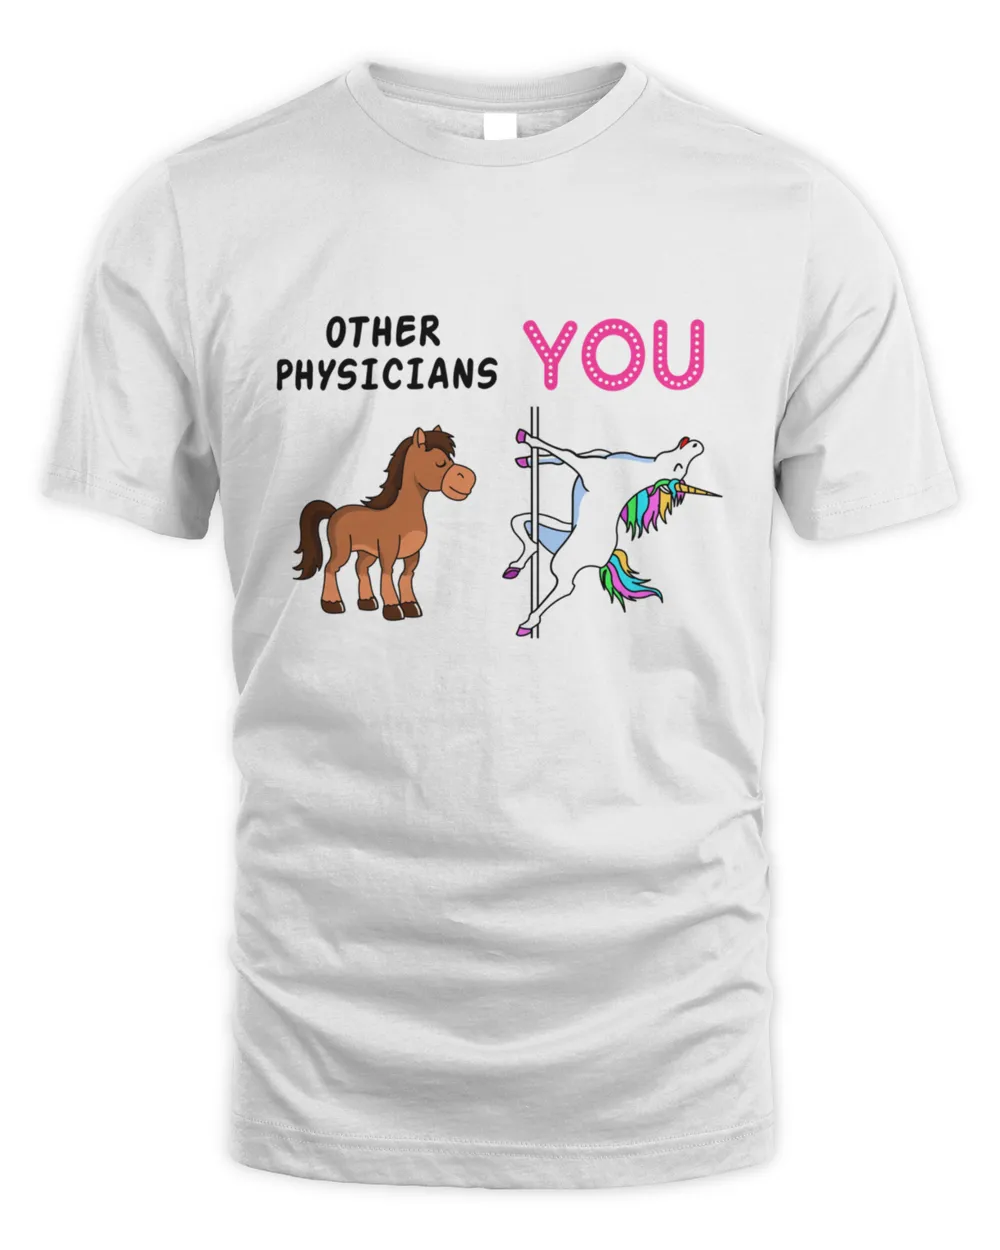 Physician Gift Funny Physician shirt Gift Idea Physician Job Quotes Gift Physician Funny Unicorn Design Best Physician Dad Husband Friends Physician Christmas Gift5 T-Shirt